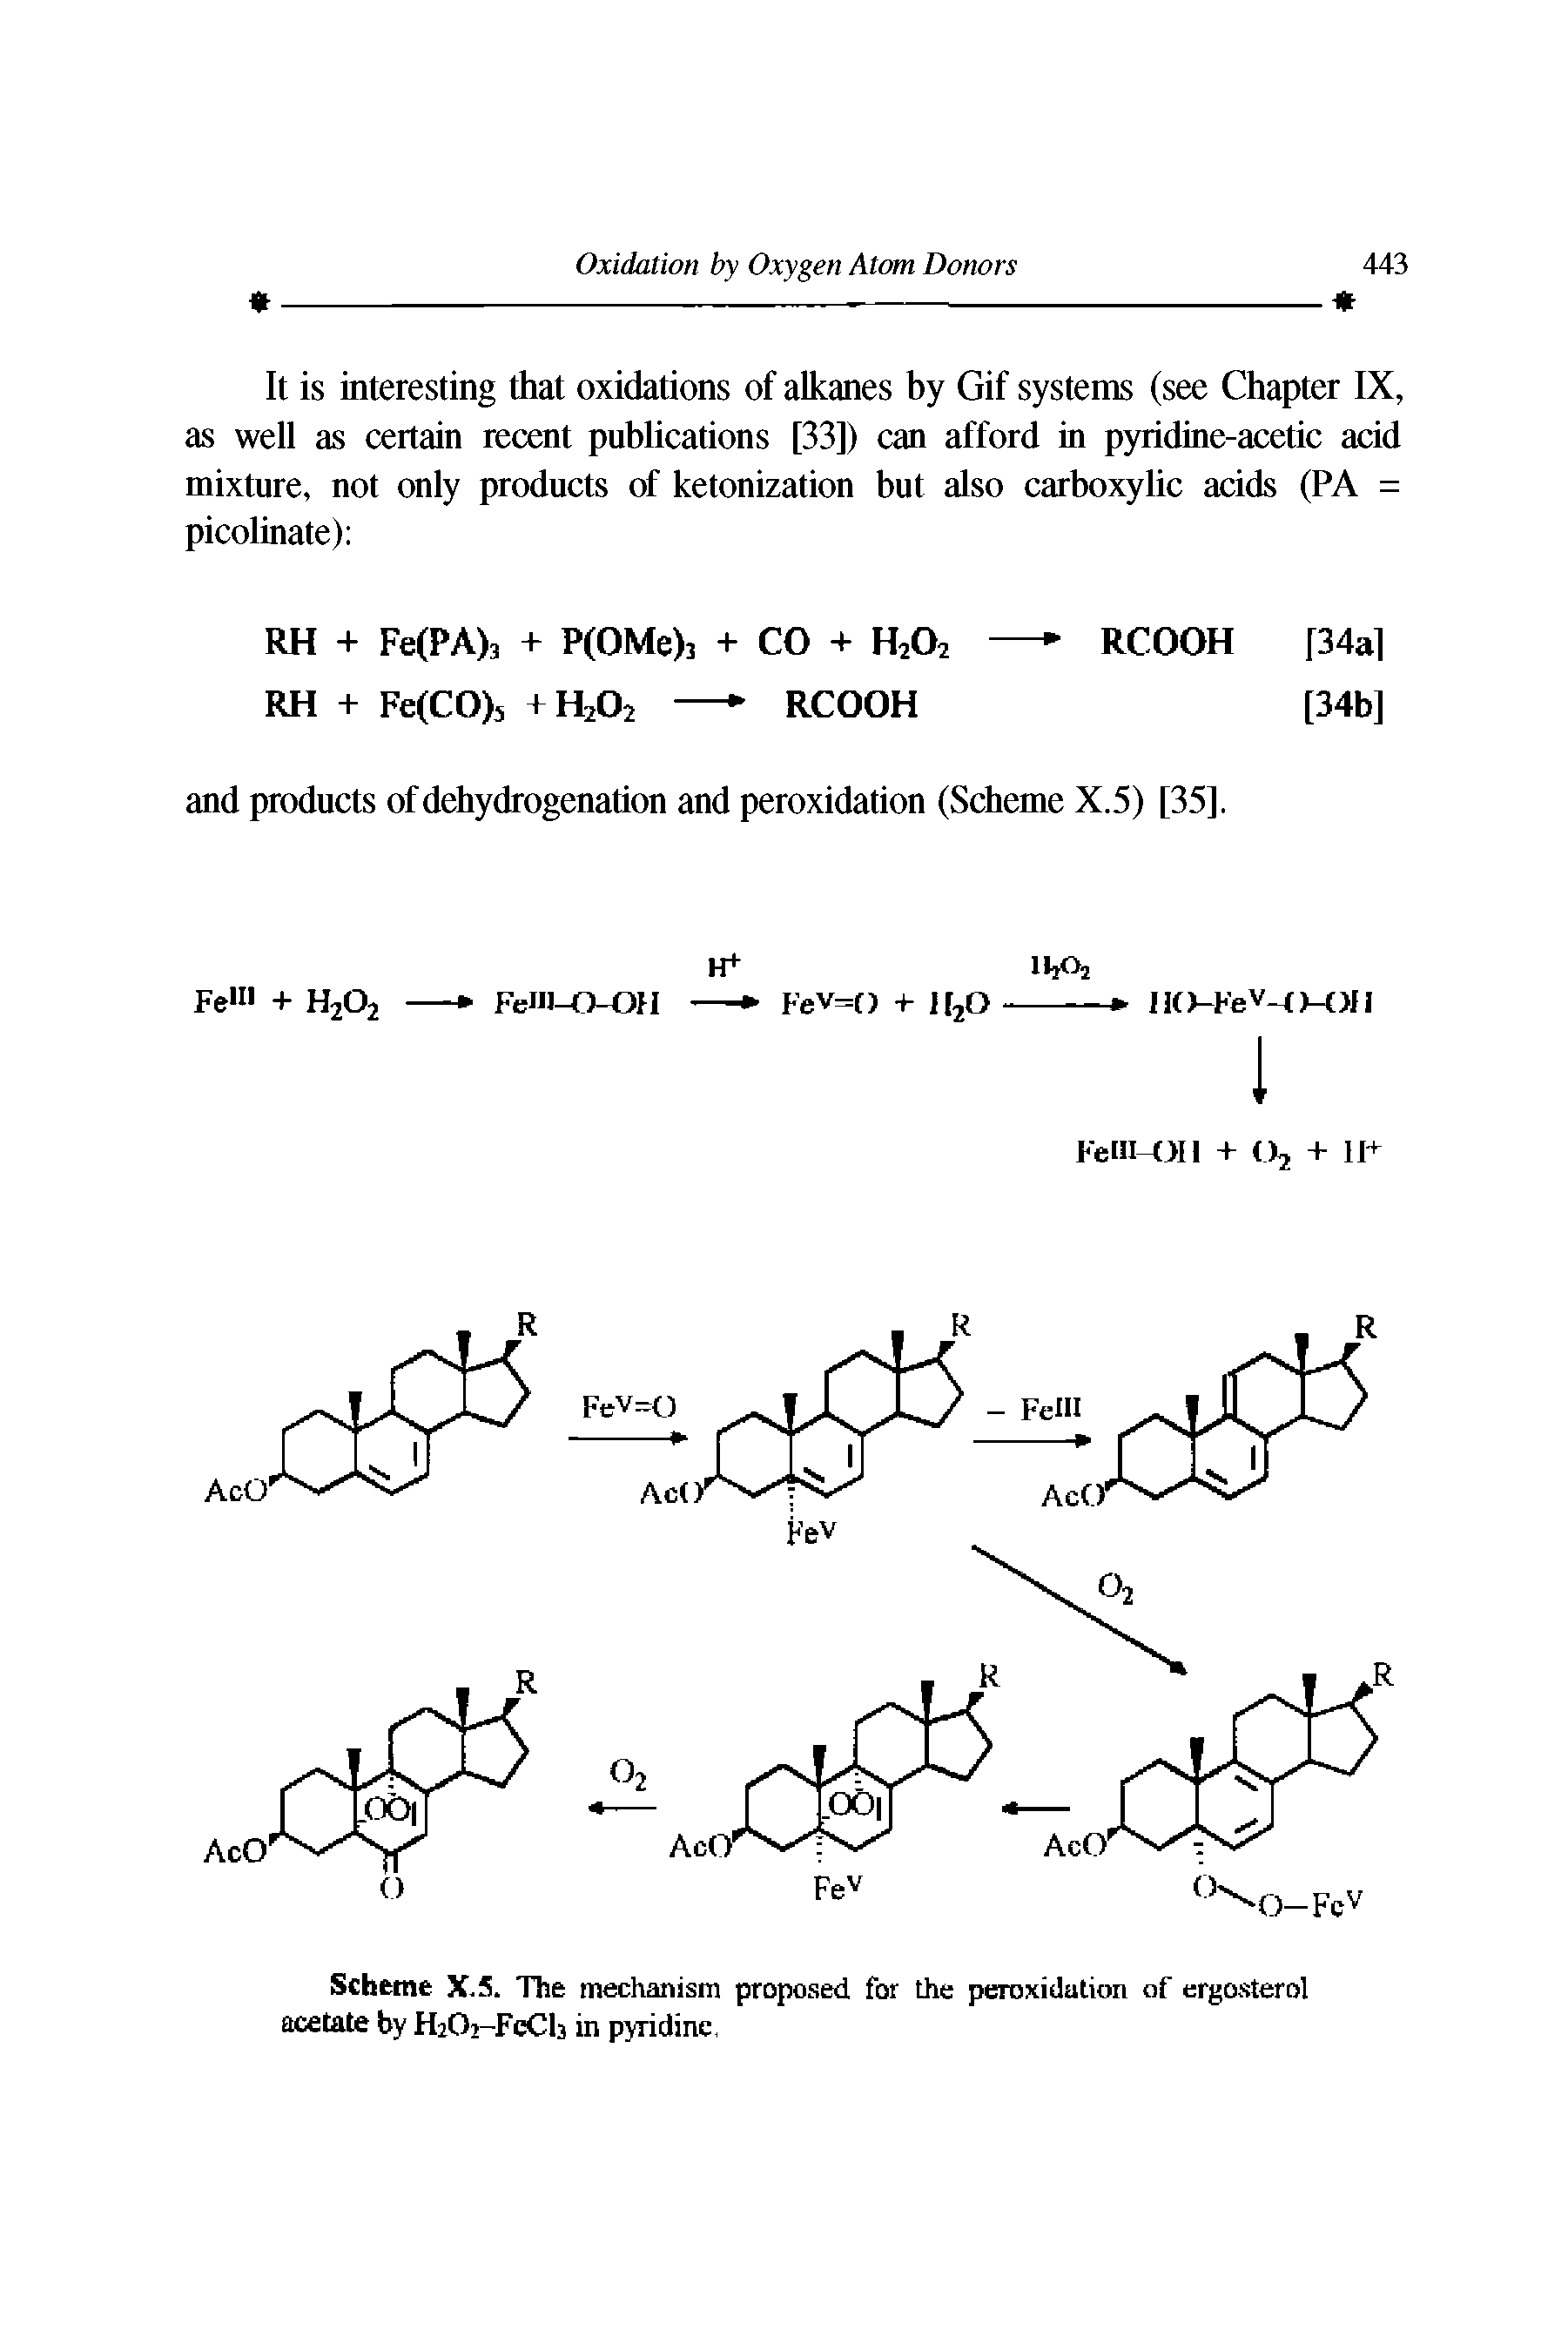 Scheme X.5. The mechanism proposed for the peroxidation of ergosterol acetate by HiOr-FcCb in pyridine,...